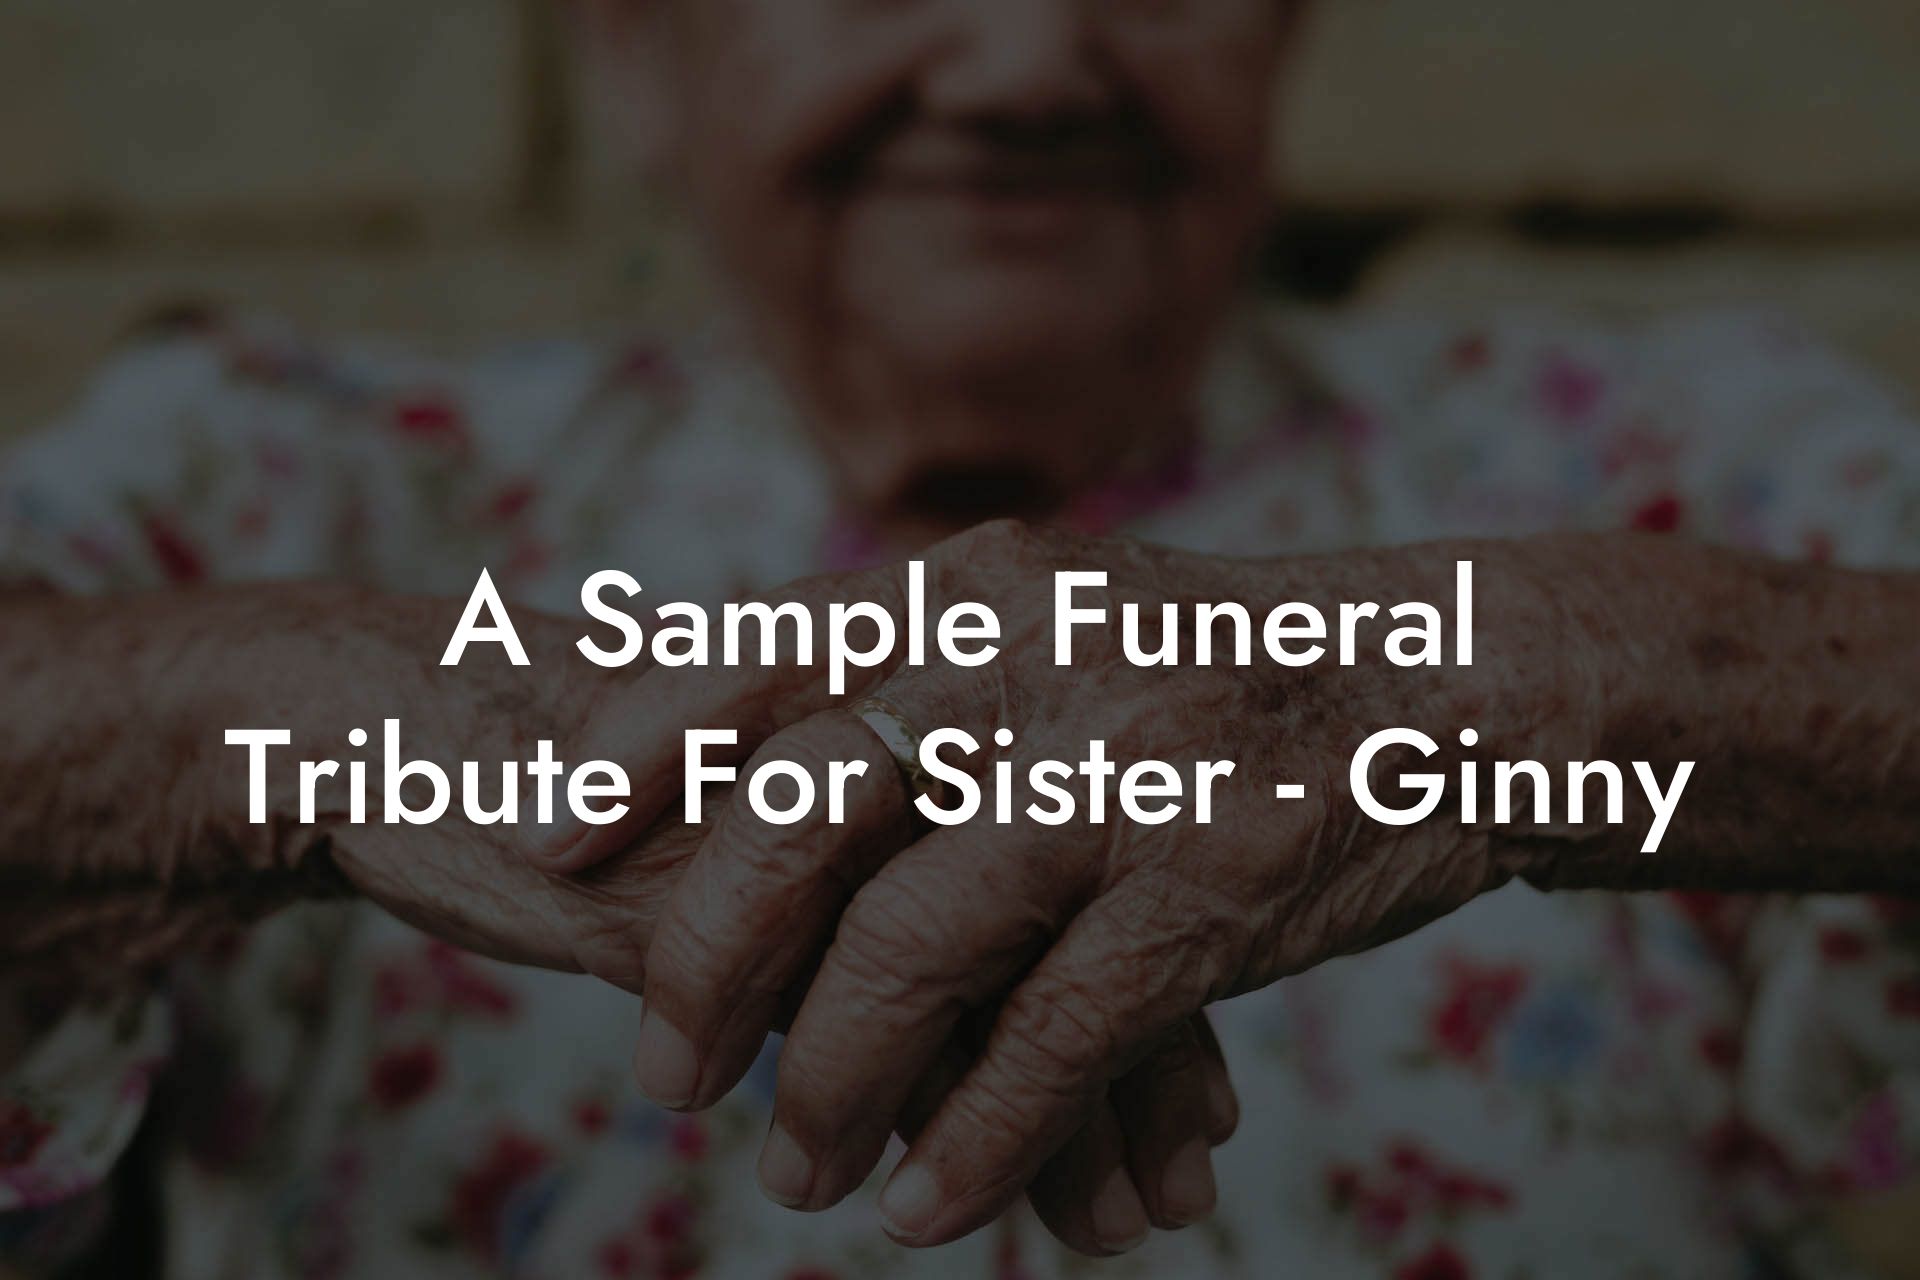 A Sample Funeral Tribute For Sister - Ginny